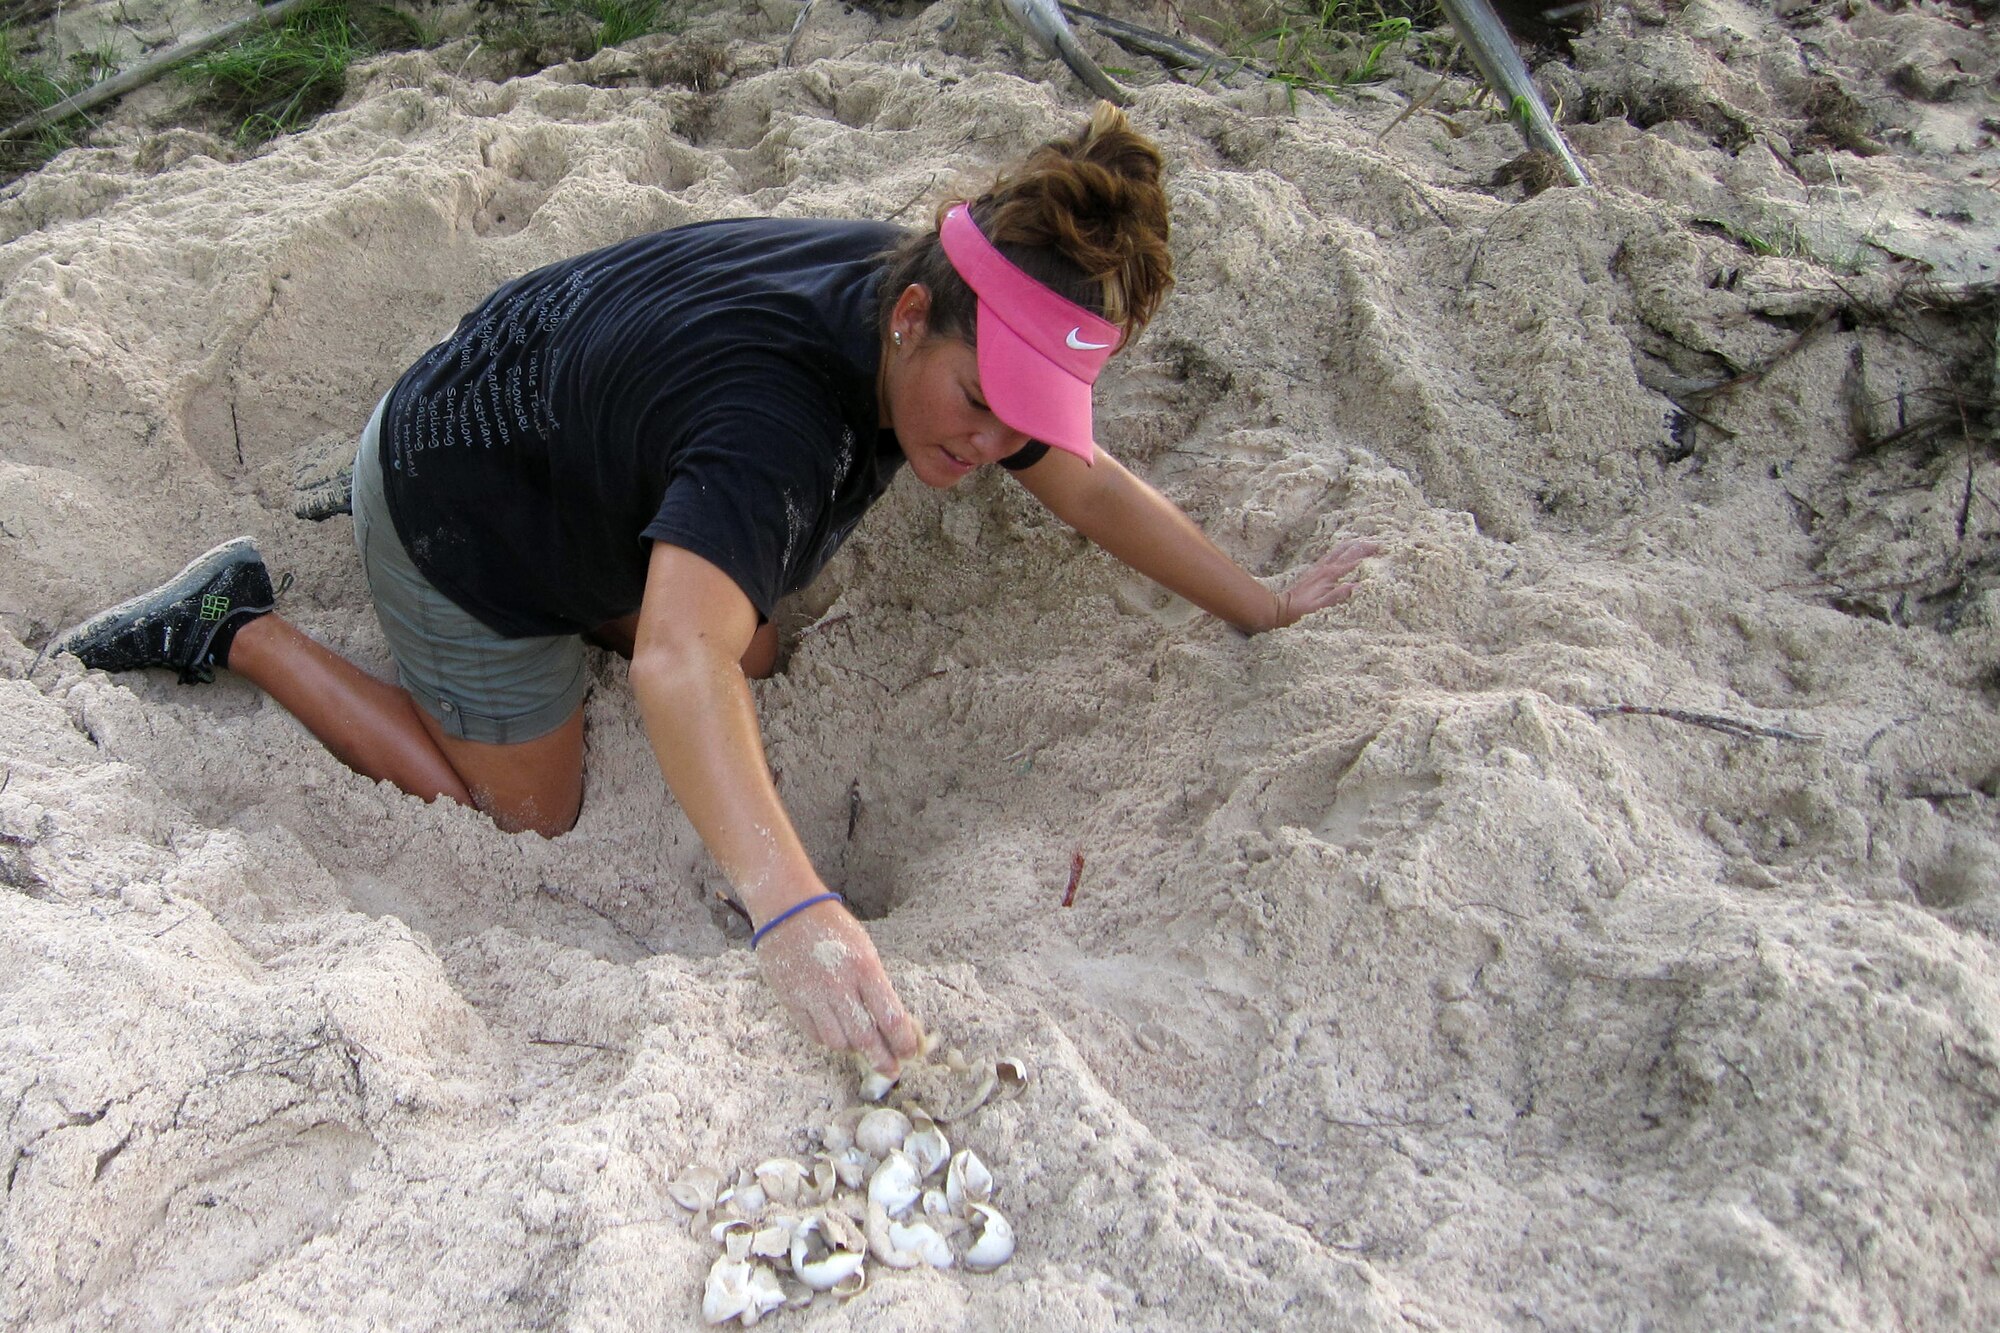 Marylou Staman inventories a nest in the Tarague Basin June 25, 2014, on Andersen Air Force Base, Guam. Staman and a scientific research team monitor the nests daily and inventory them afterward by counting leftover eggshells to determine how many hatchlings emerged. Staman is a University of Guam Sea Turtle Monitoring, Protection and Educational Outreach on Guam project manager. (Courtesy photo)